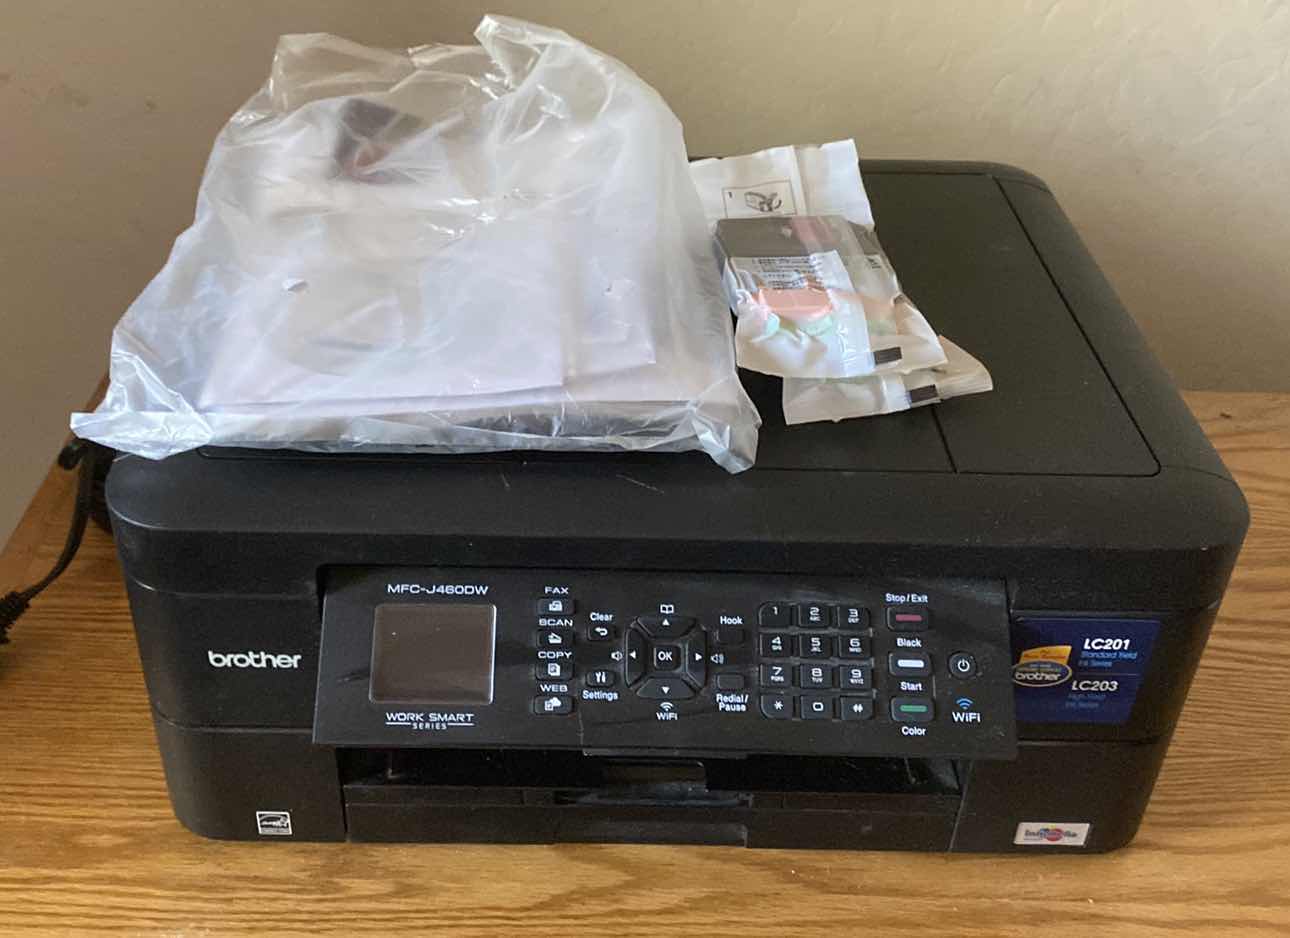 Photo 1 of BROTHER PRINTER MFC-J4600W